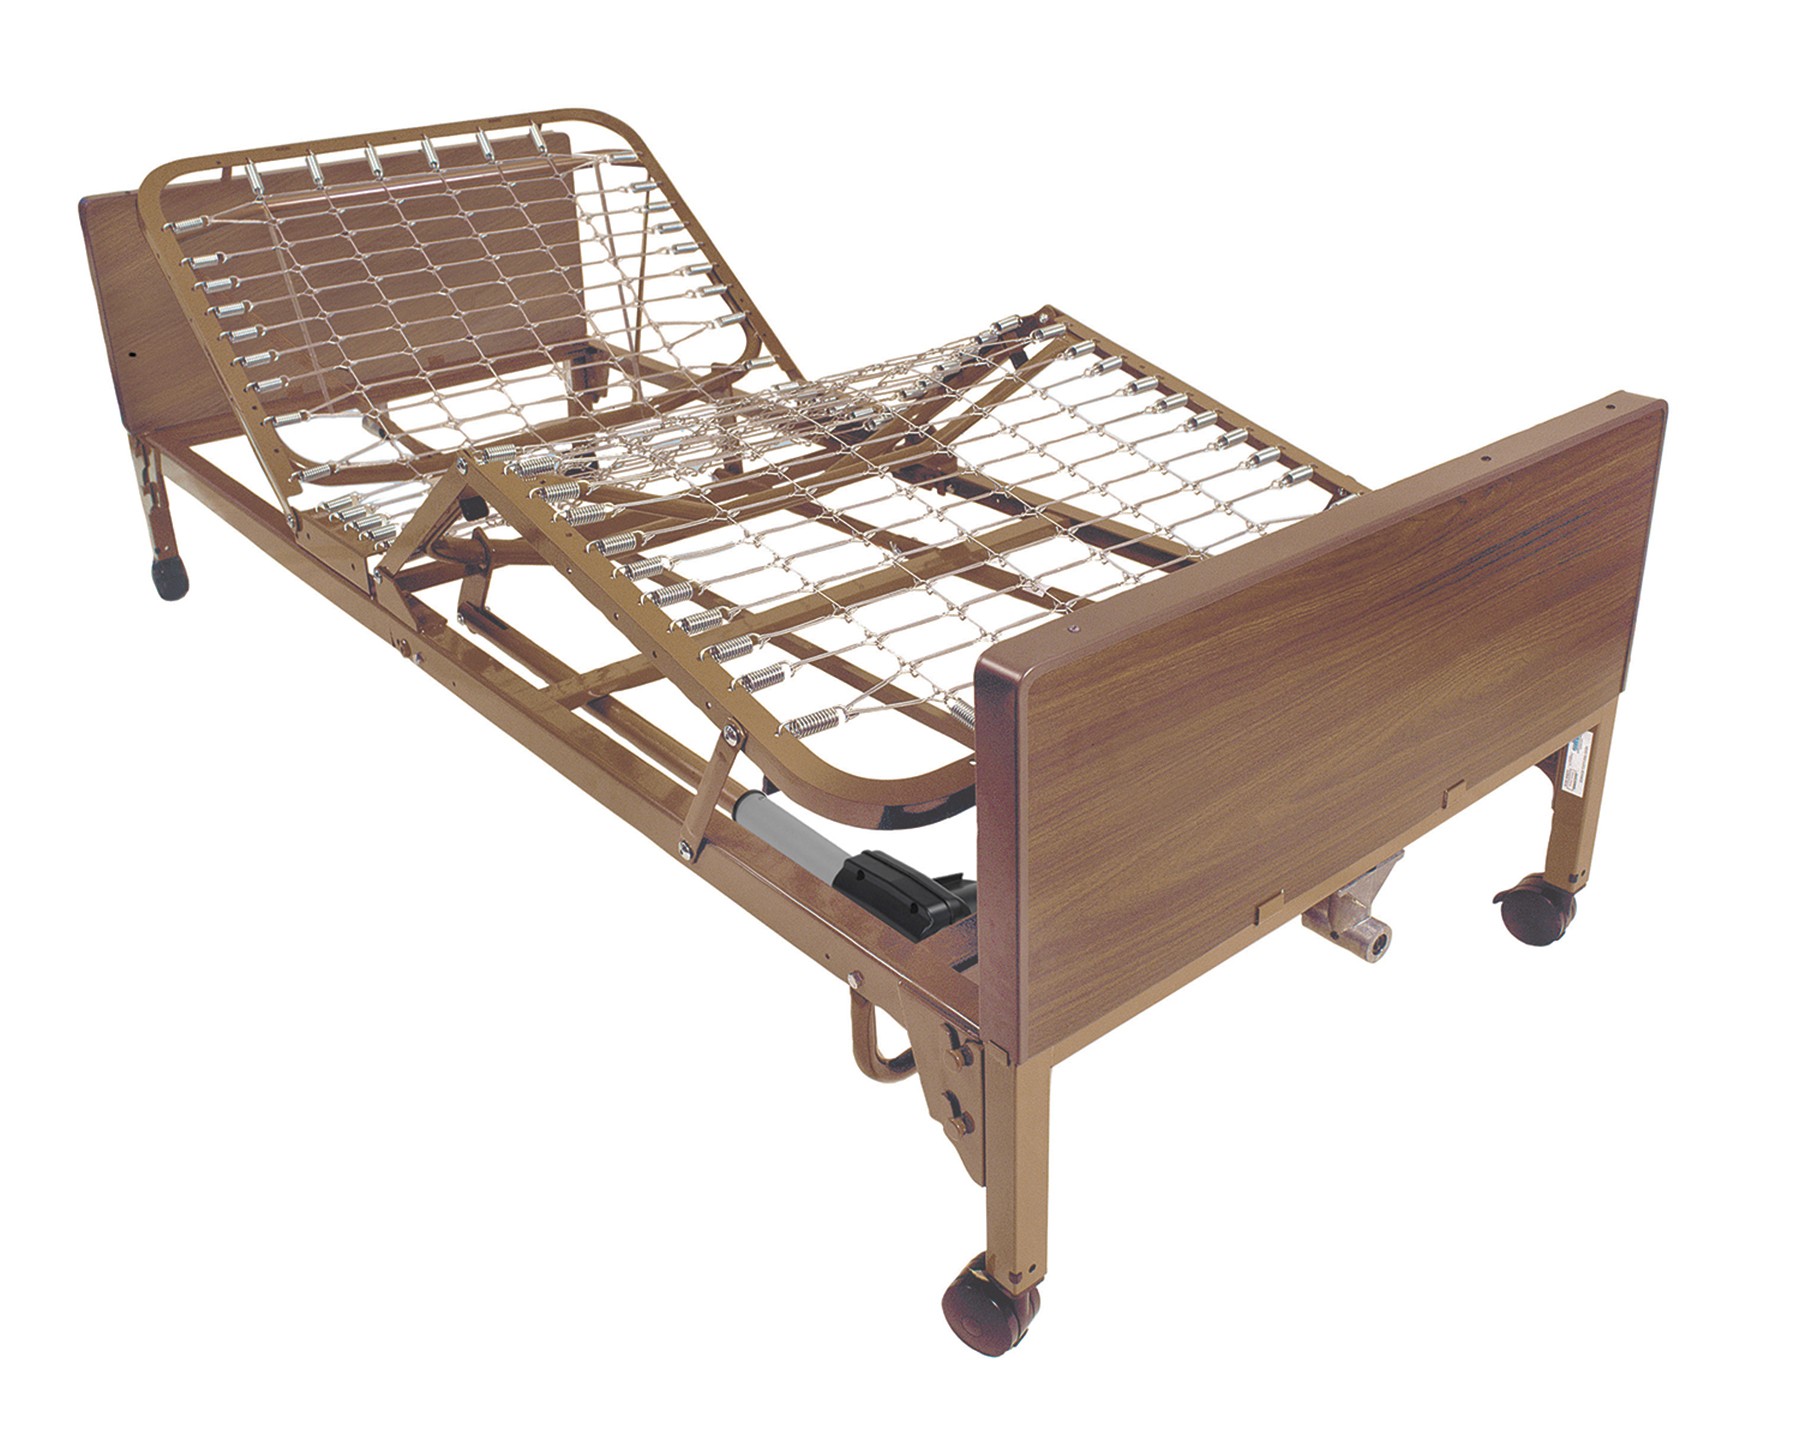 Irvine inexpensive Electric Hospital Beds cheap discount sale price